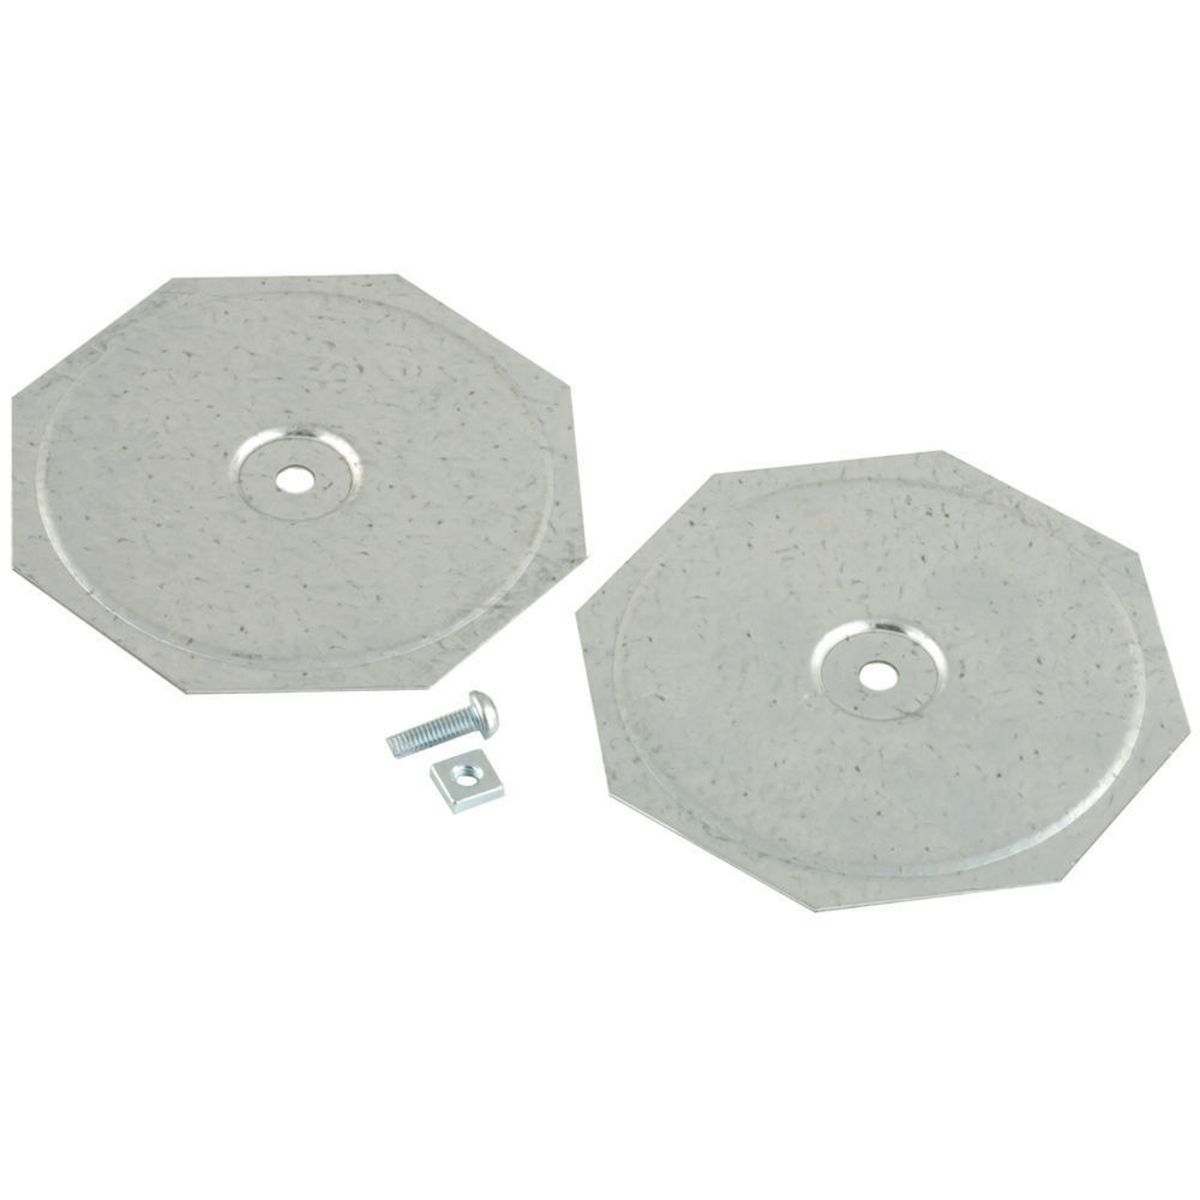 Two-Piece Knockout Seals, Steel, 3-1/2 In. Trade Size